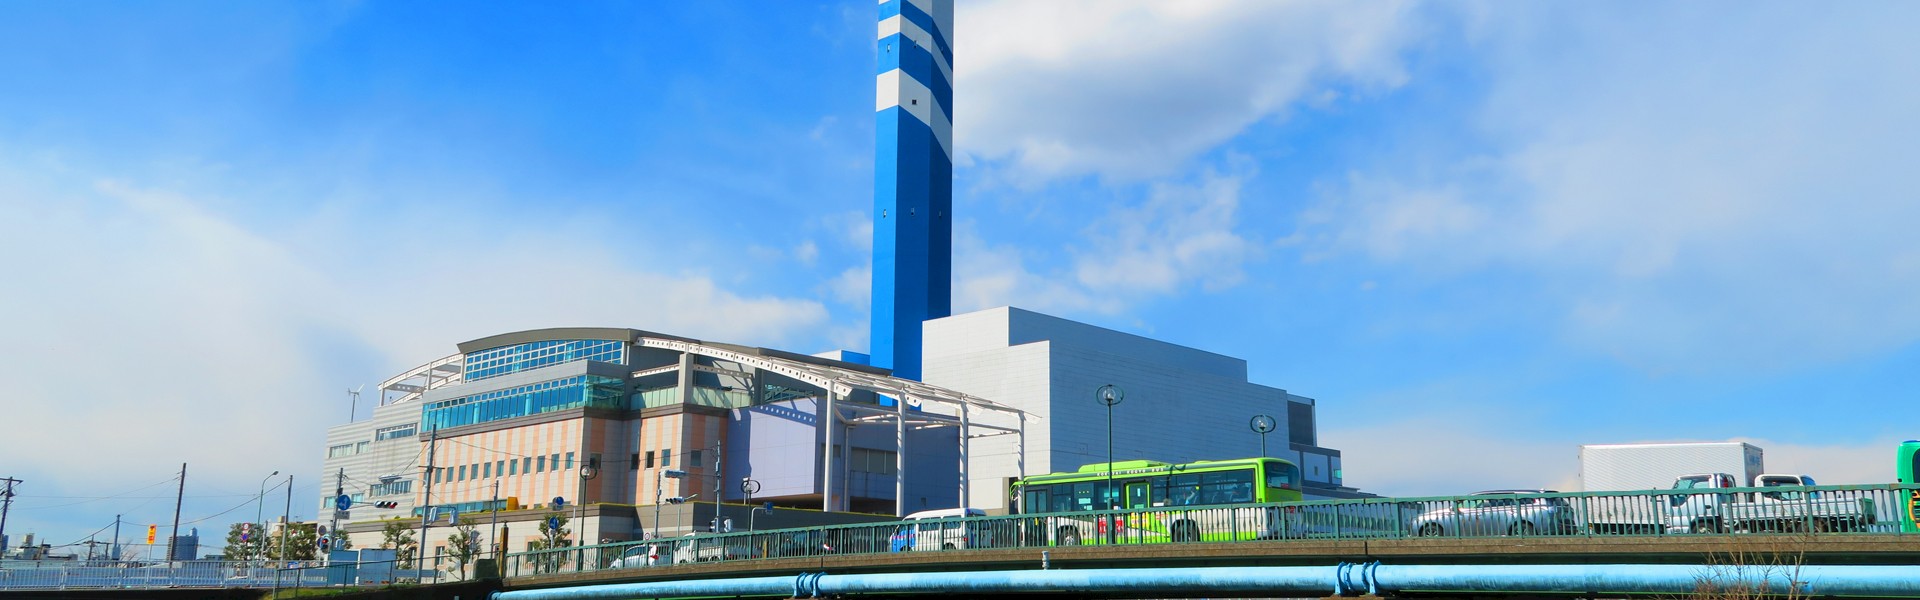 We use gasification to convert municipal solid wastes in clean electricity and CO2e credits.